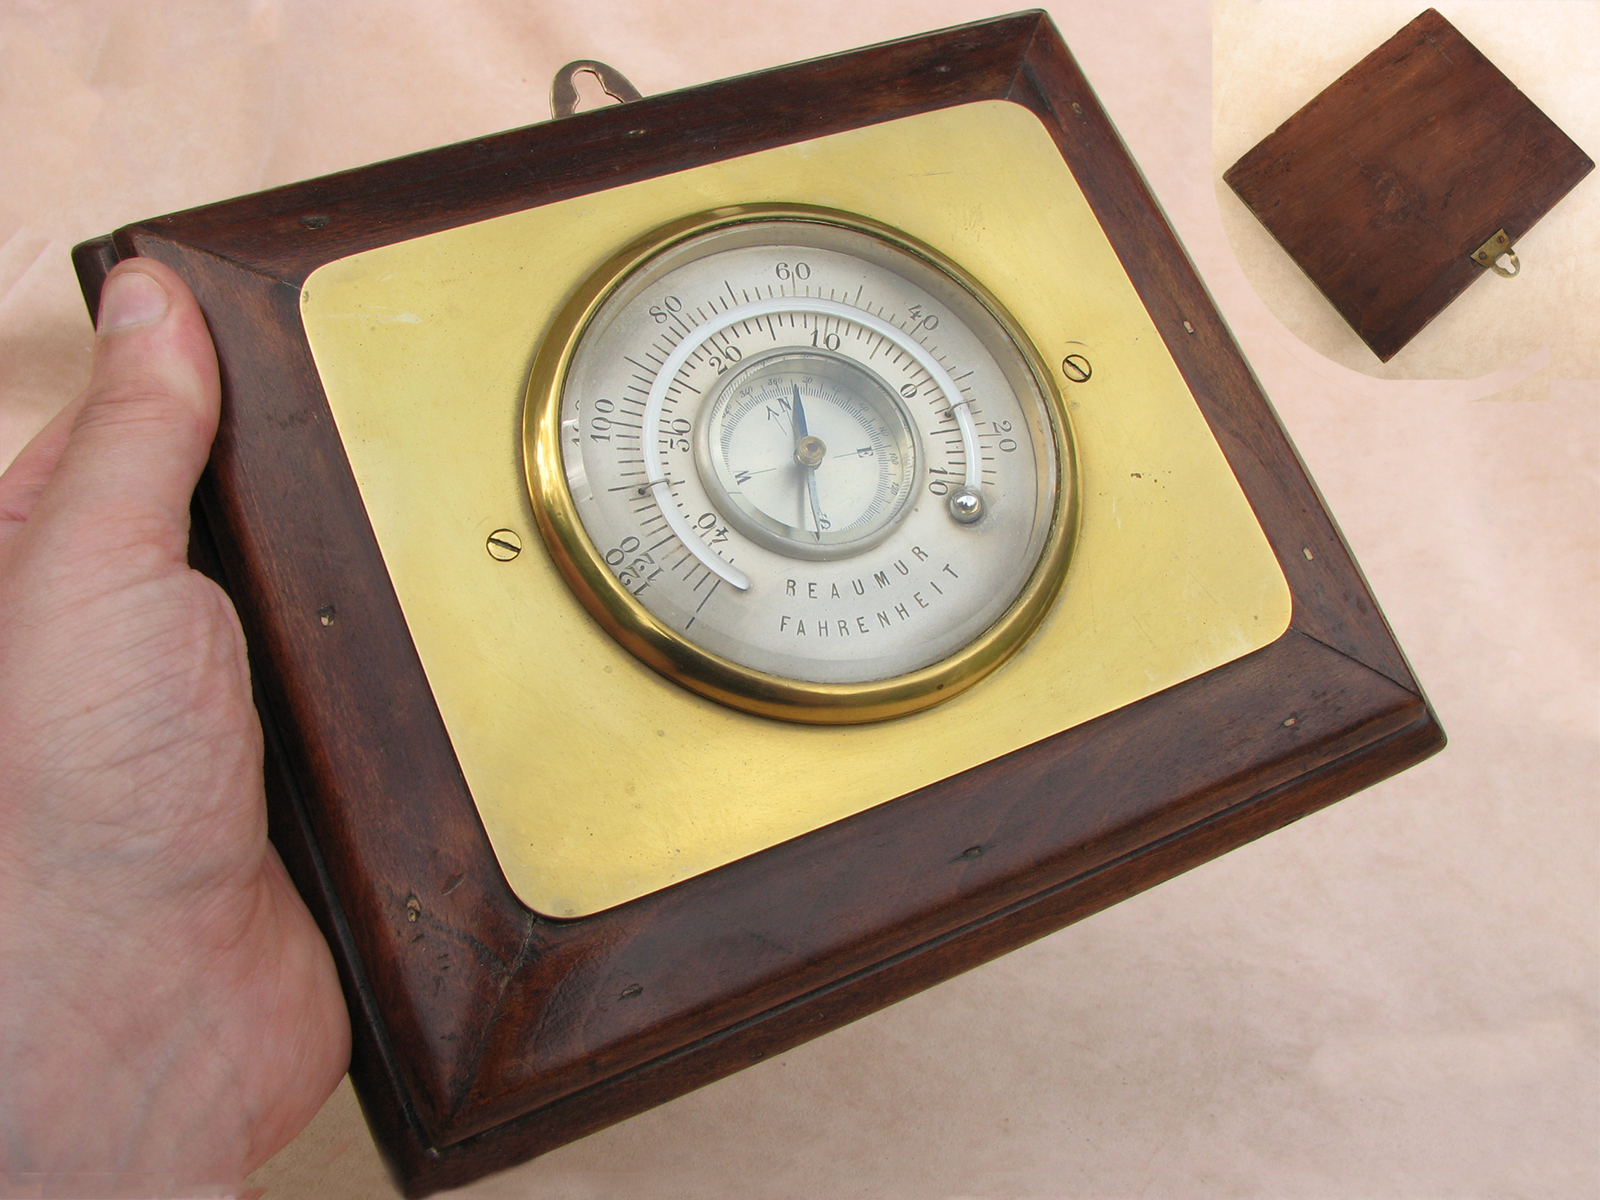 Unusual compass and thermometer combination mounted on wooden backboard